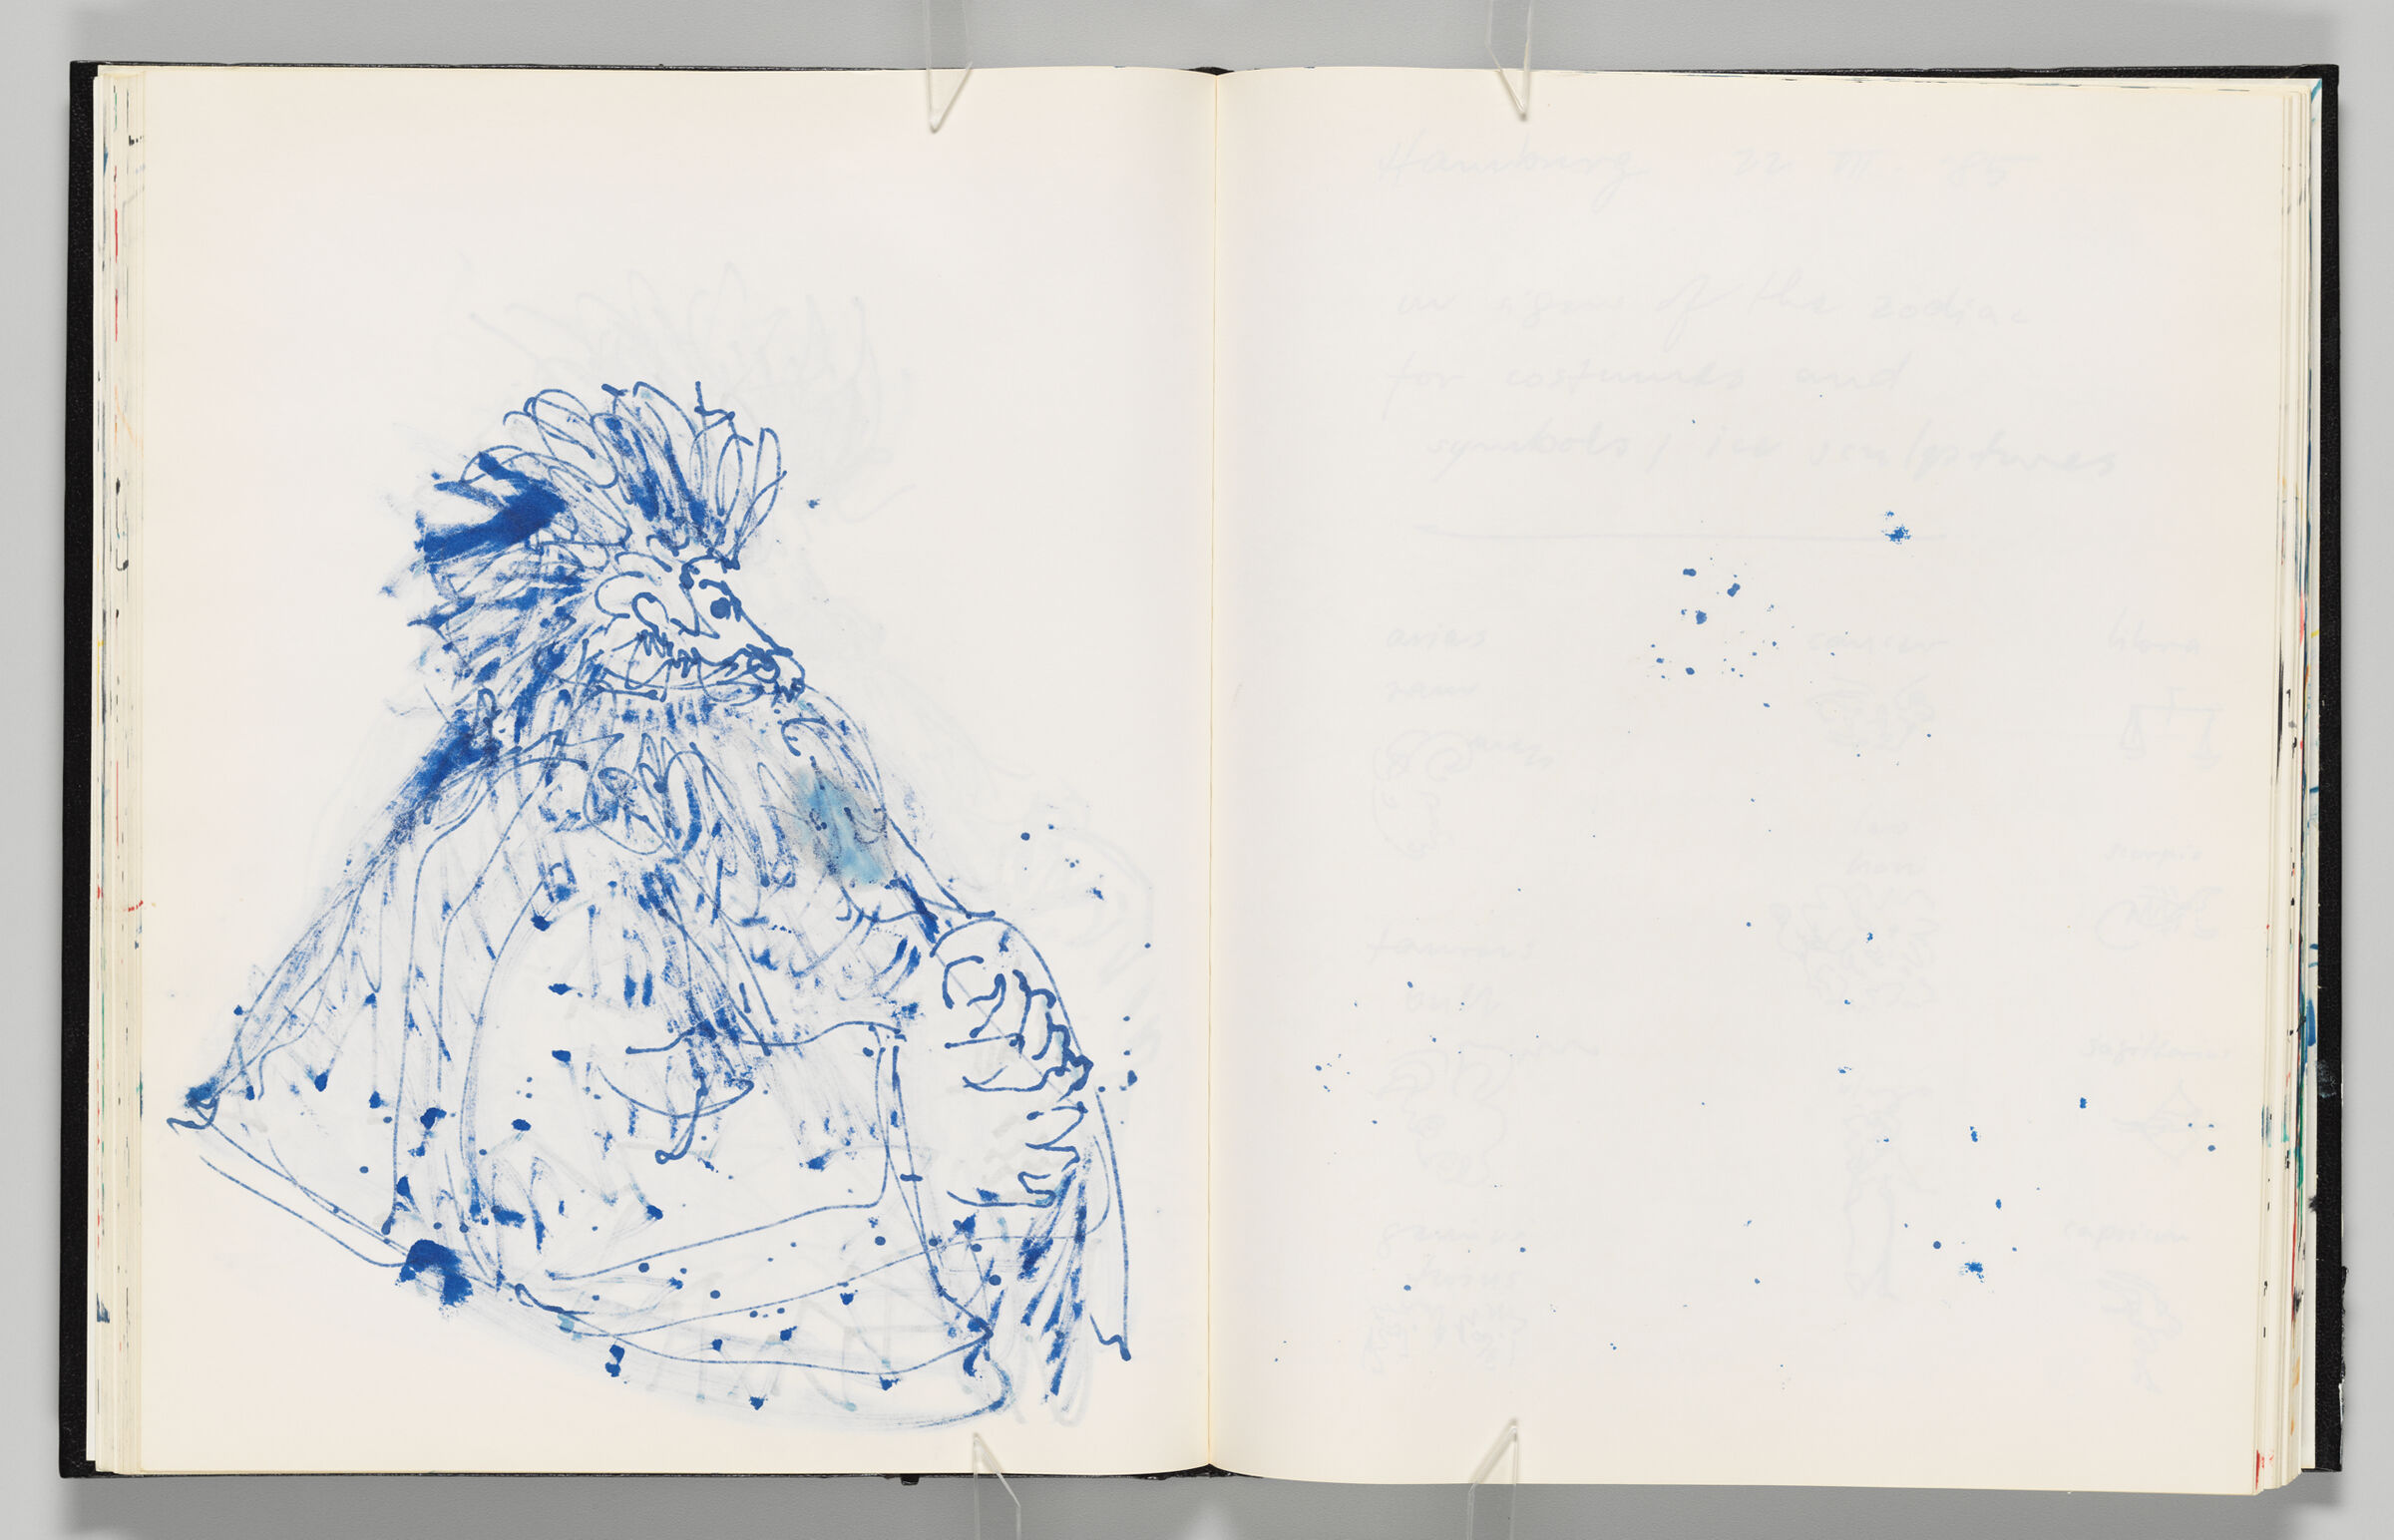 Untitled (Bleed-Through Of Previous Page, Left Page); Untitled (Blank With Color Transfer Marks, Right Page)